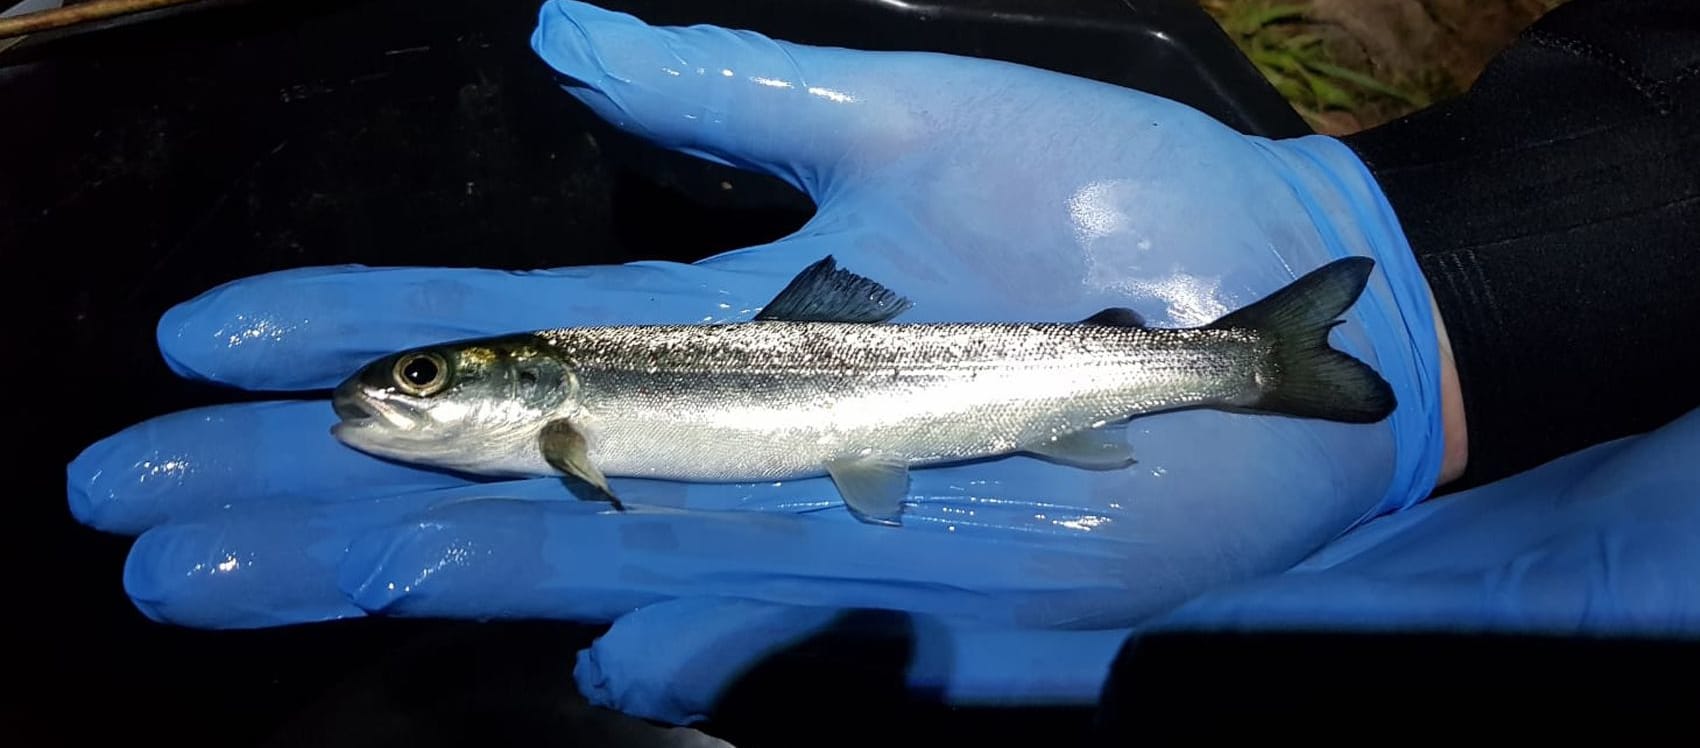 Usk Smolt Tracking Project Underway